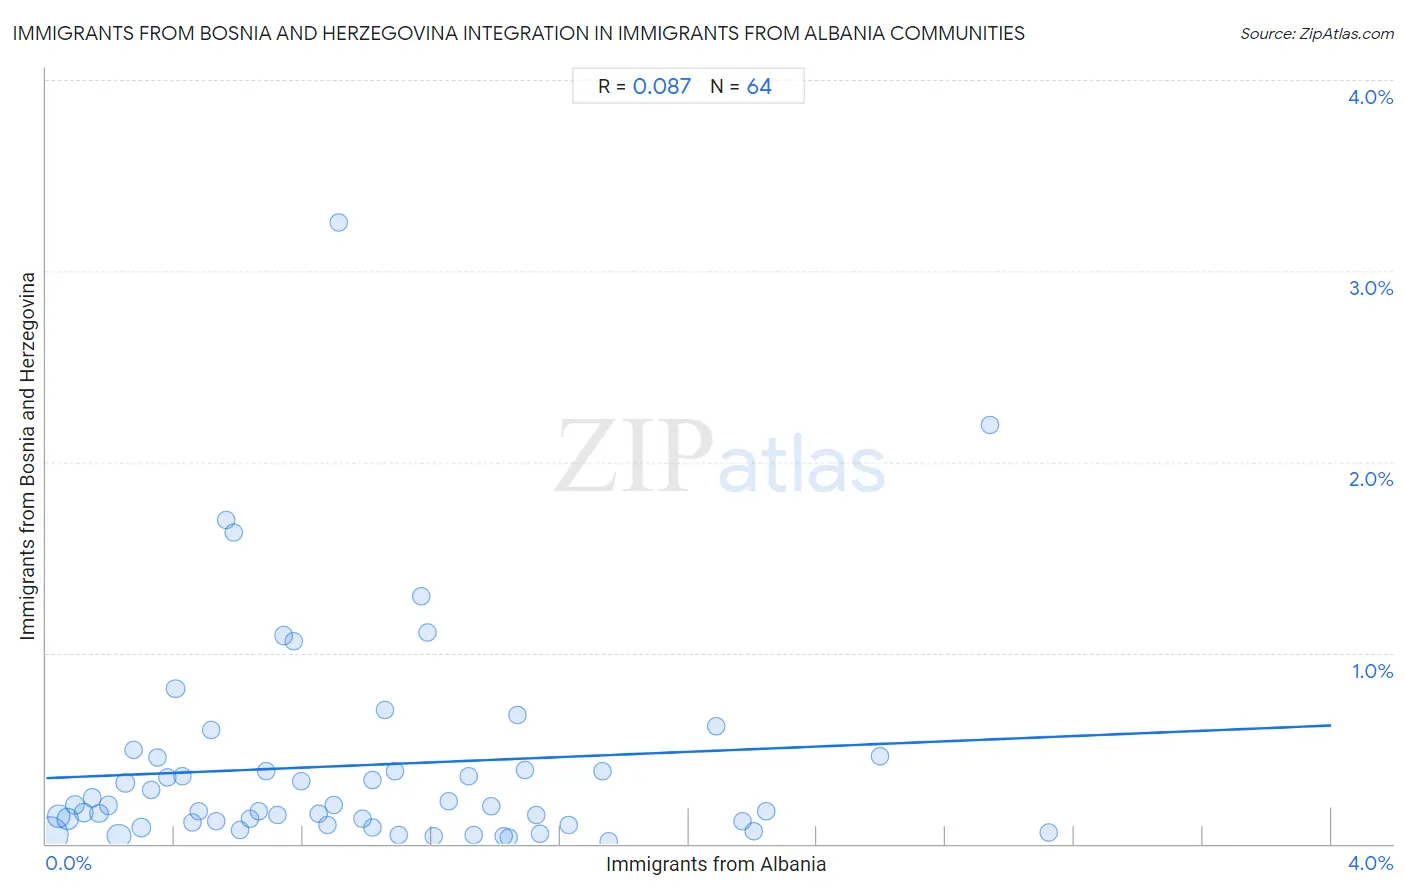 Immigrants from Albania Integration in Immigrants from Bosnia and Herzegovina Communities